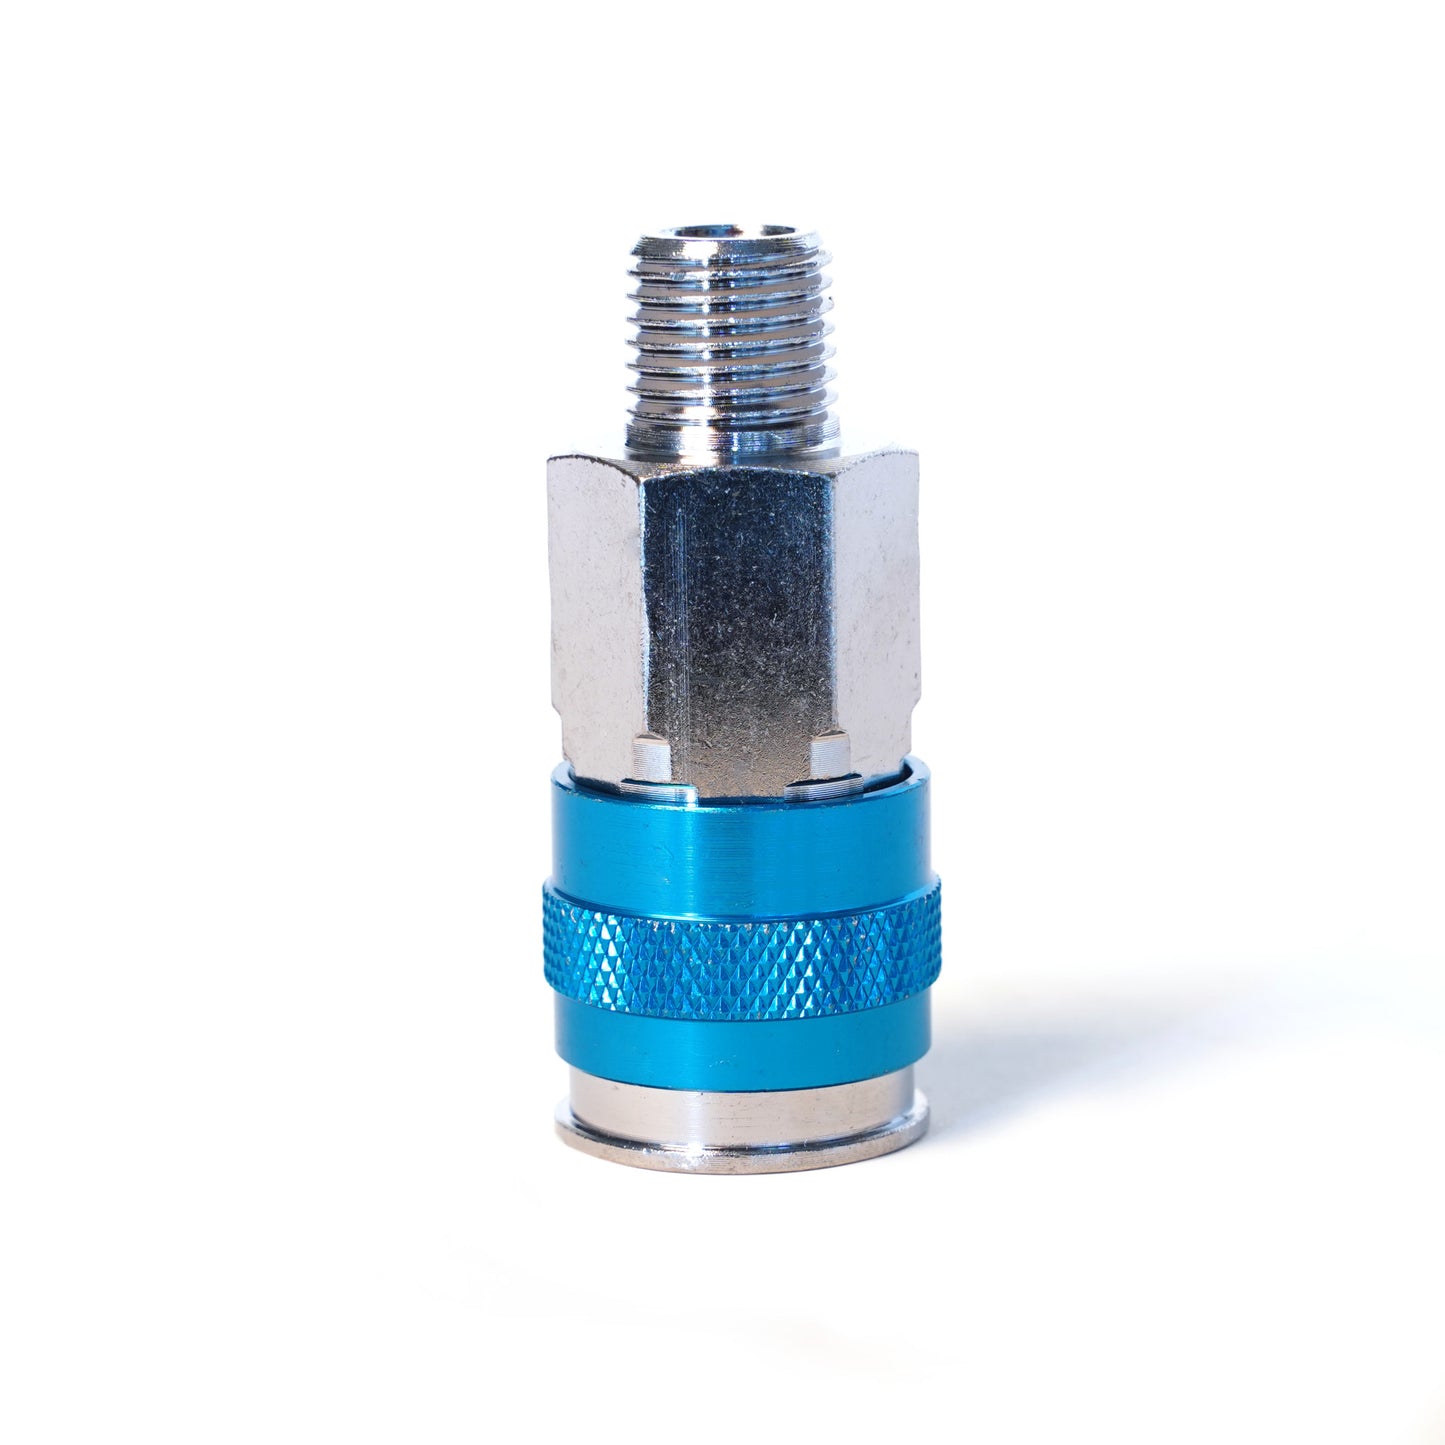 1/4-Inch Plated Brass 3-in-1 Universal Quick Disconnect Coupler with 1/4-Inch Male NPT Threads